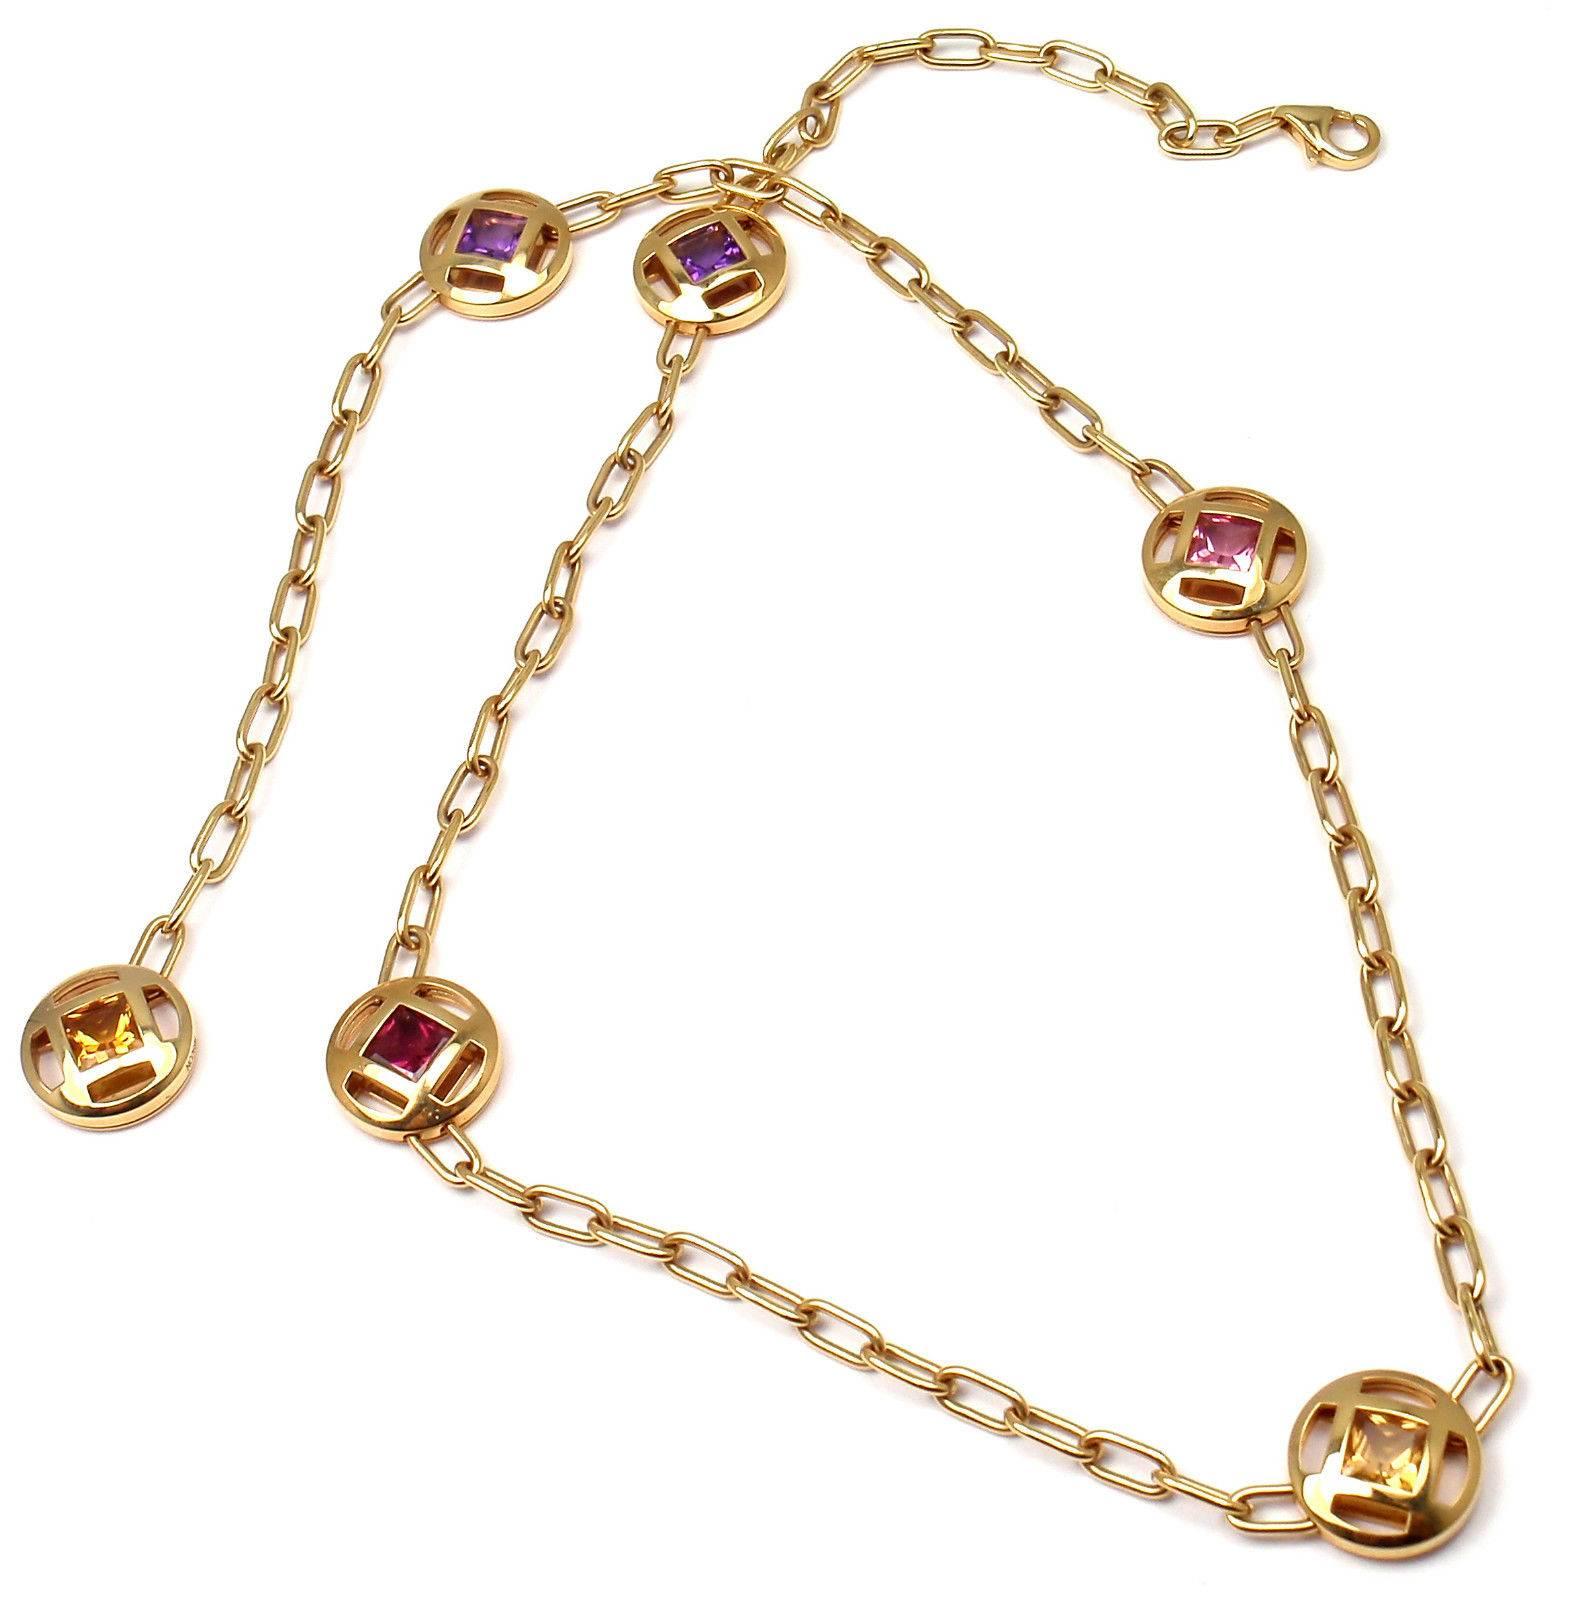 18k Yellow Gold Sapphire Amethyst Citrine Tourmaline Pasha Necklace by Cartier. 
With 2 amethysts, 1 citrine, 1 yellow sapphire, 2 pink tourmalines
This necklace is in mint condition and comes with Cartier box and Cartier certificate.

Details: